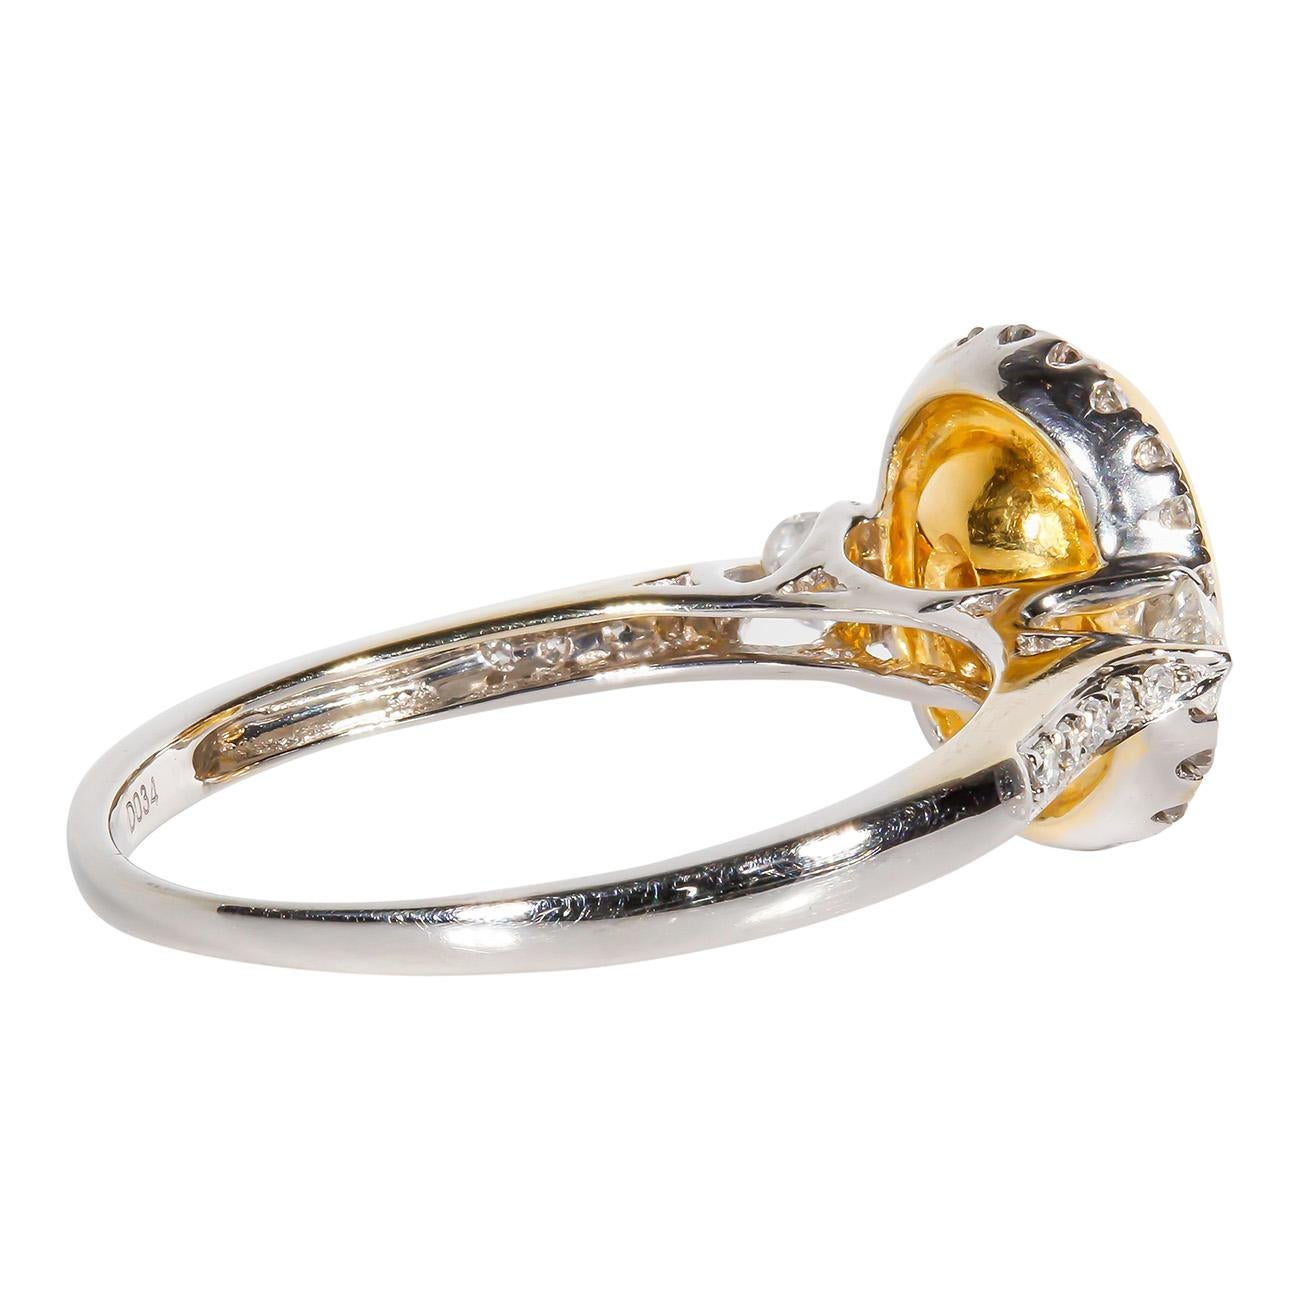 Oval Cut Halo Ring in 18K WG with Fancy Light Yellow Oval Diamond Center. D1.36ct.t.w. For Sale